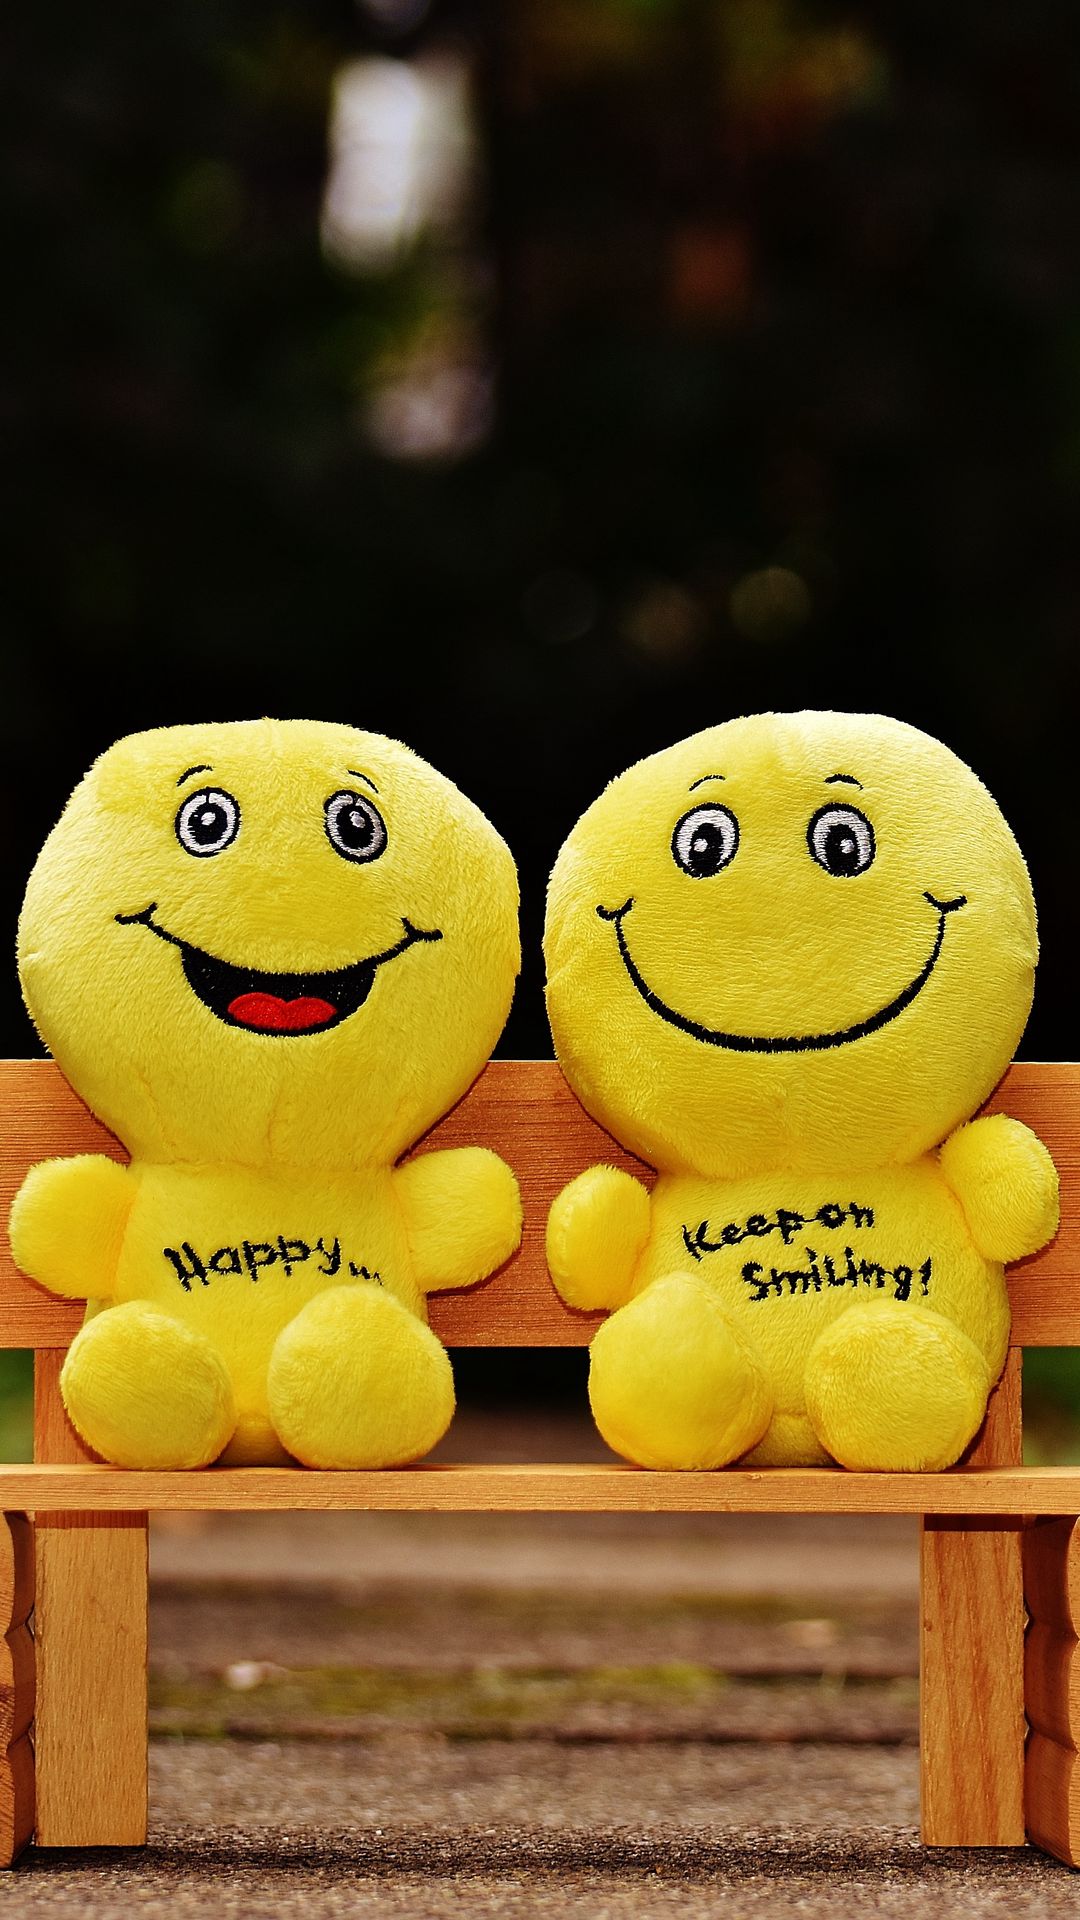 1080x1920 Wallpaper smiles, happy, cheerful, smile, bench, cute